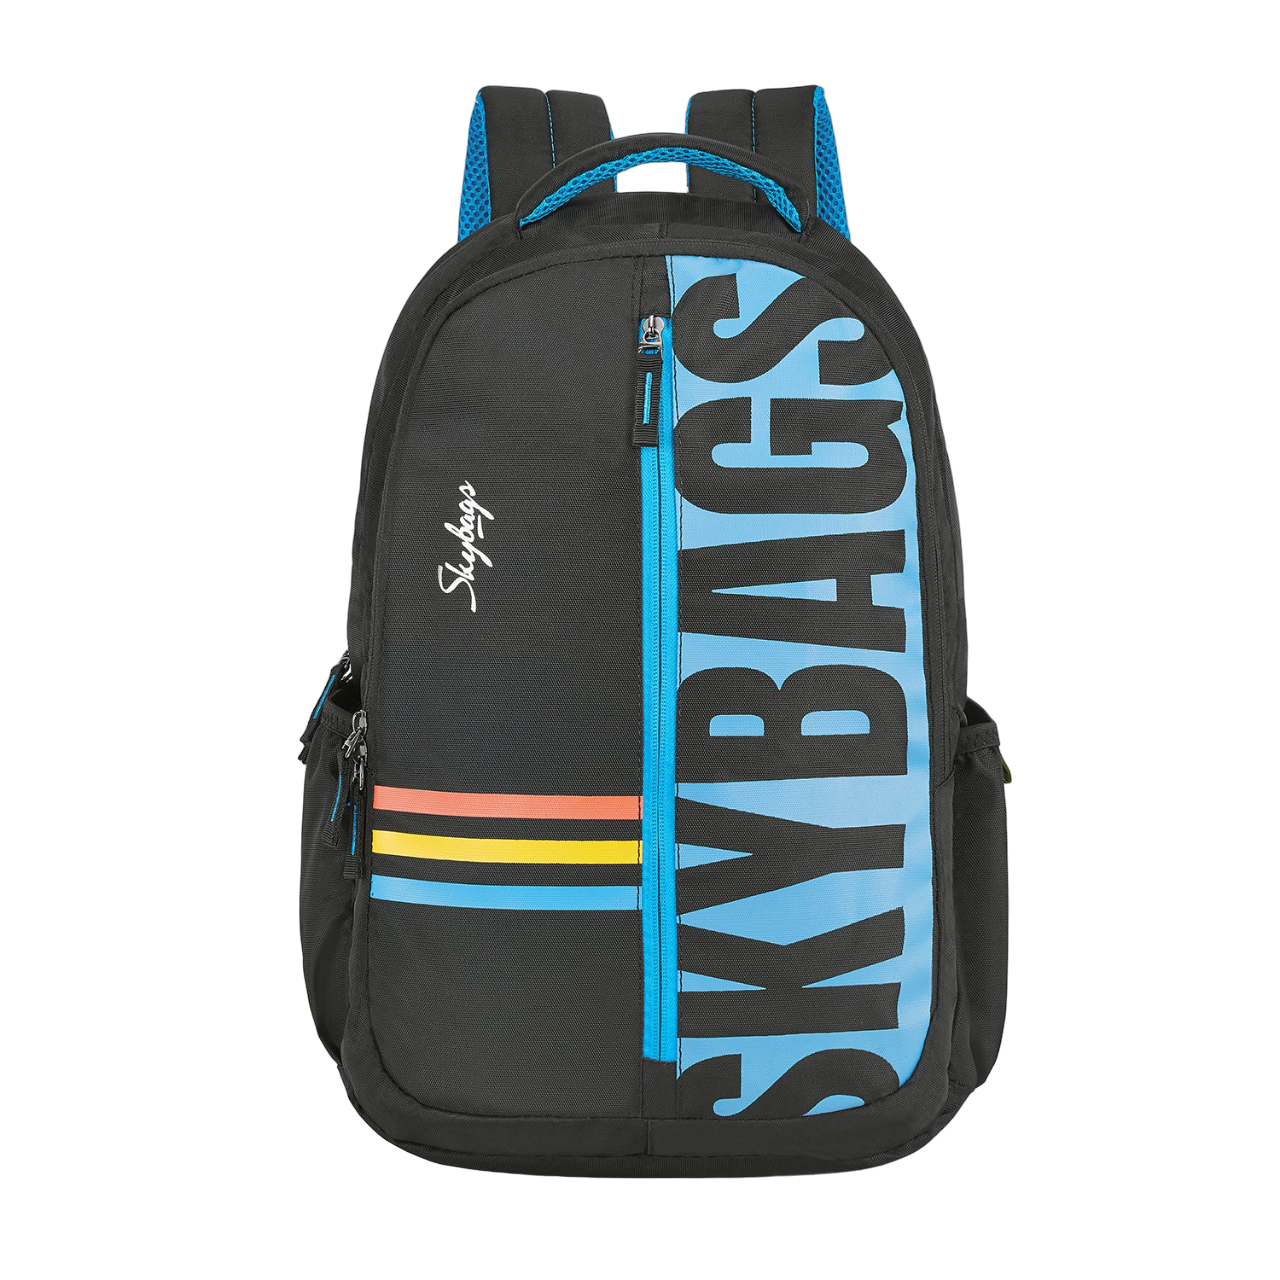 Skybags One Size Brat 46 Cms, 22 Ltrs Casual Standard Backpack - Sea Green  | Casual backpack, Backpacks, Buy backpack